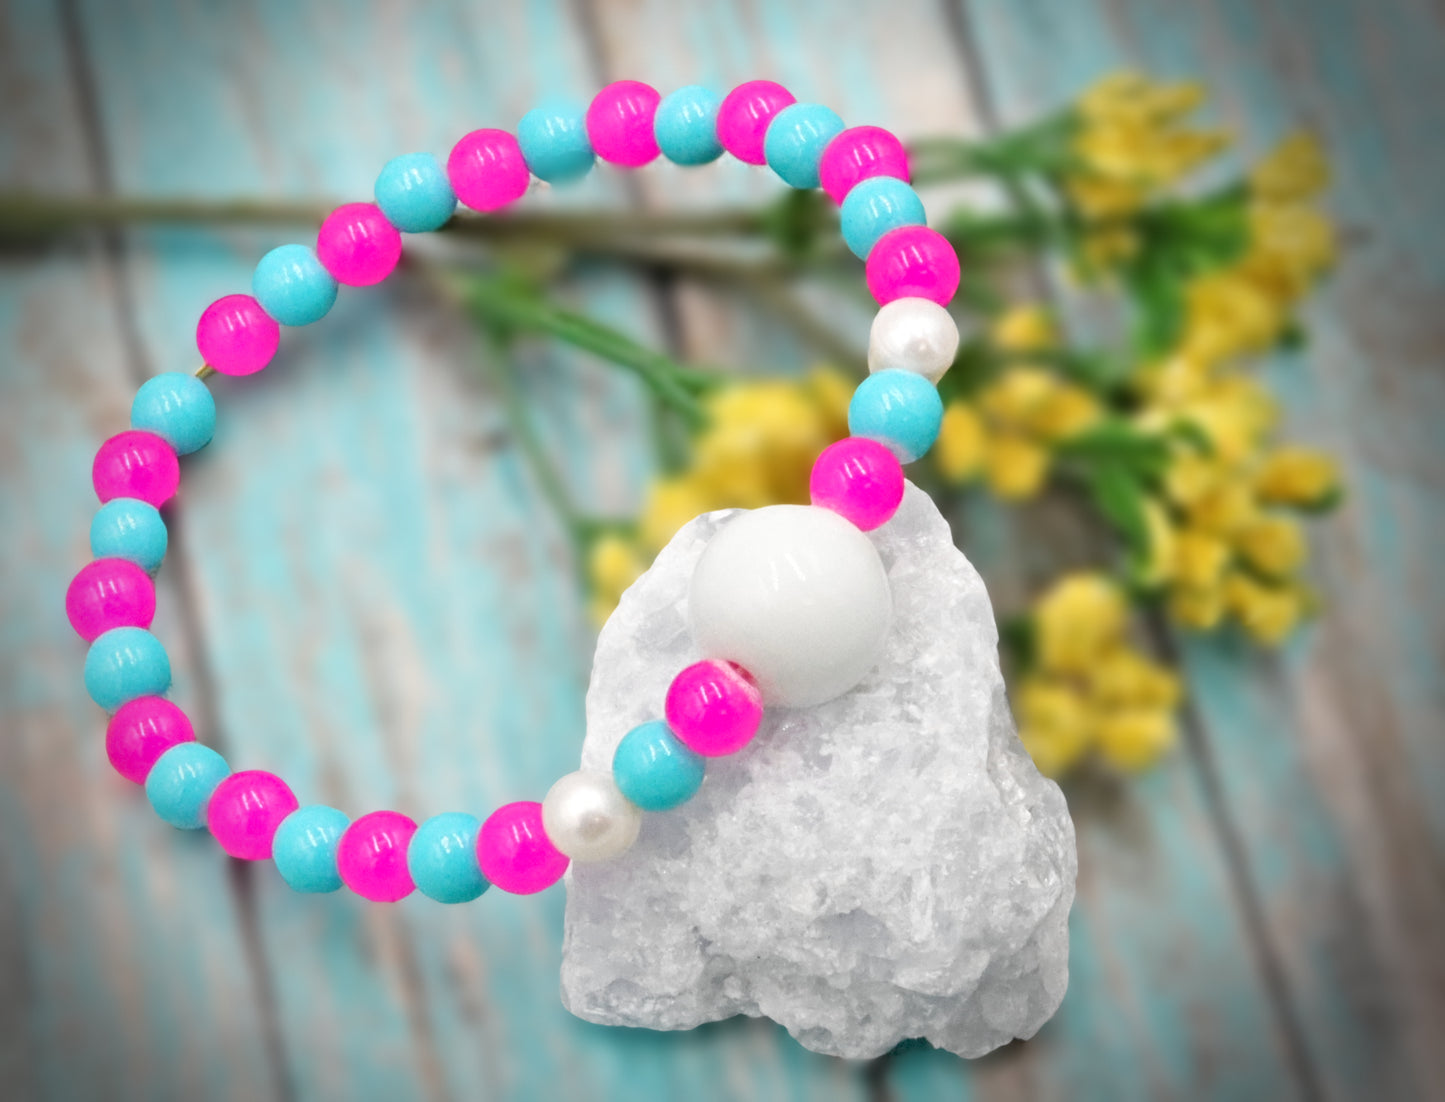 Hot Pink & Turquoise Blue Artisan Glass Beads & Cultured Pearl Bracelet by Monkeys Mojo